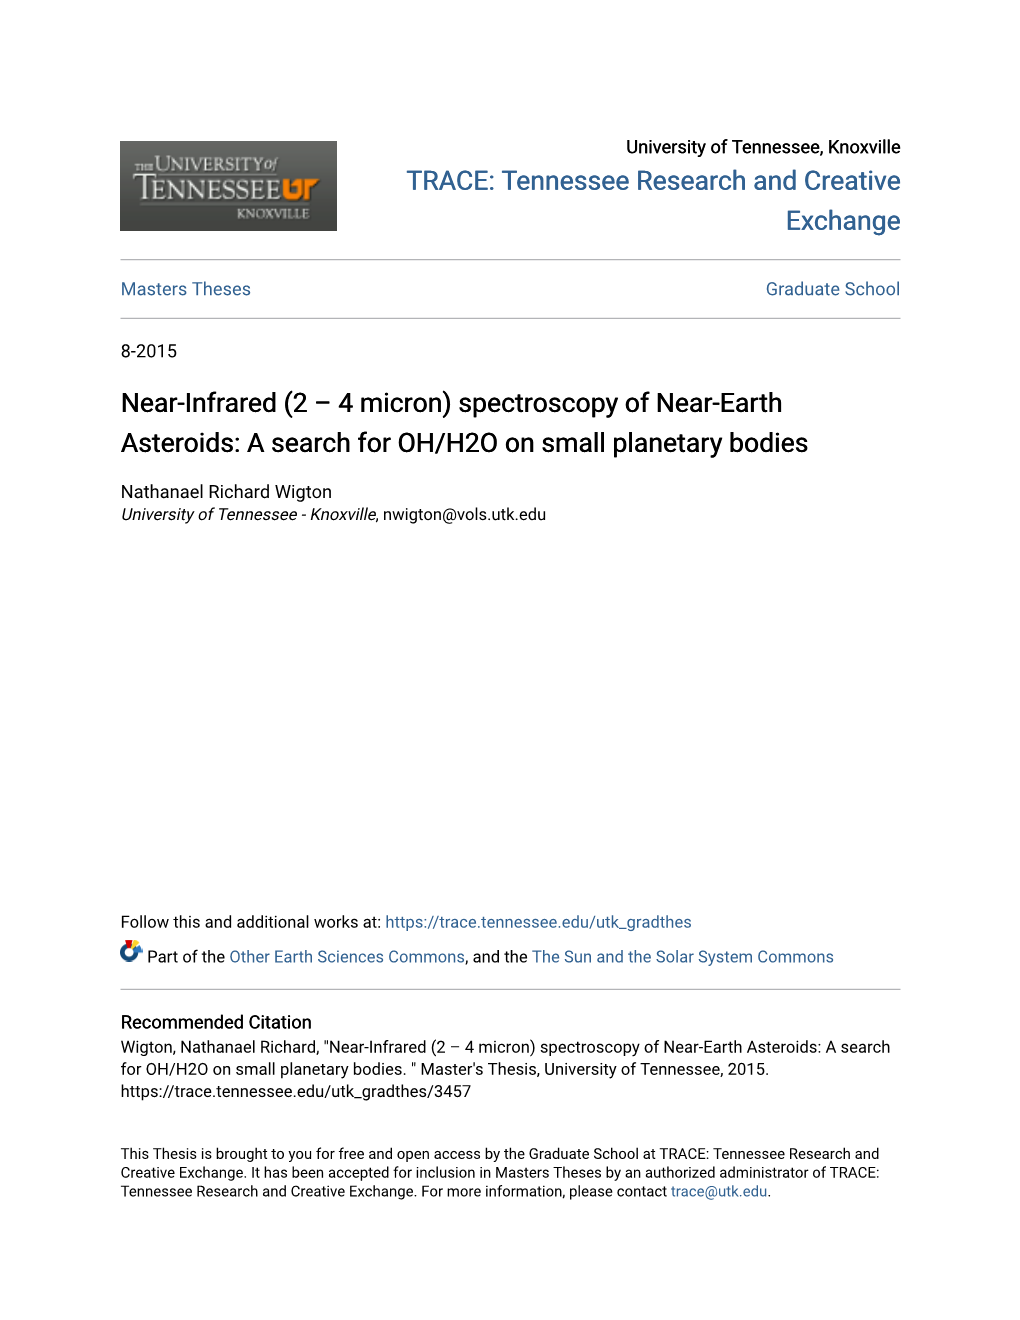 Spectroscopy of Near-Earth Asteroids: a Search for OH/H2O on Small Planetary Bodies